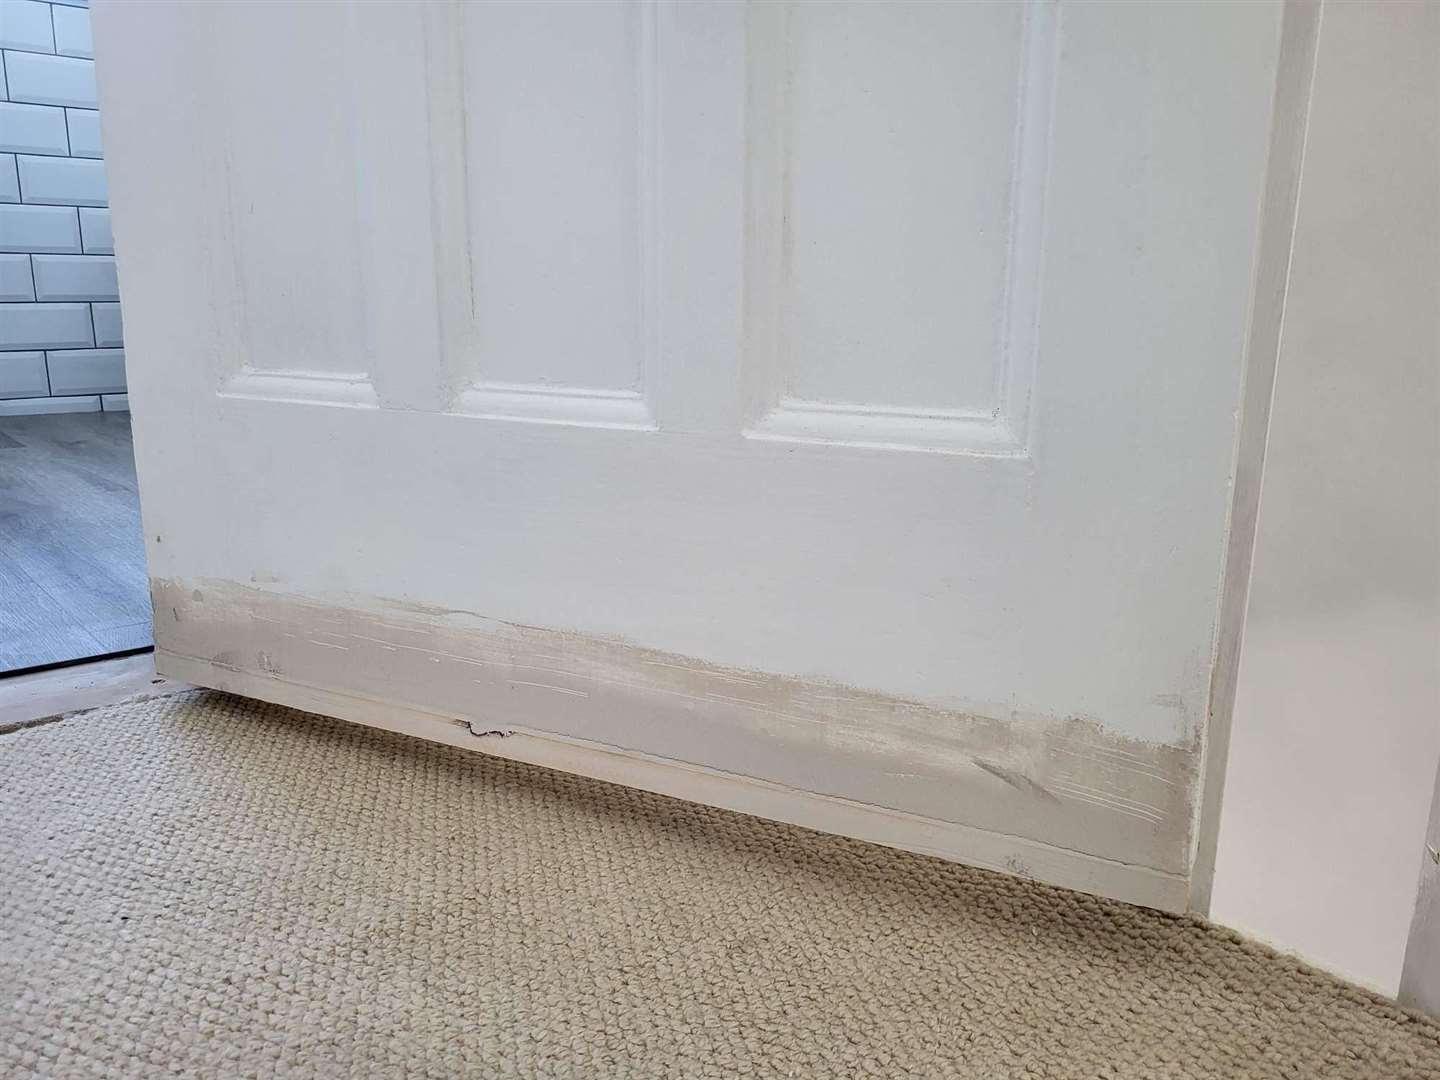 The door frame was too big for the door, so the fitter added a piece of wood